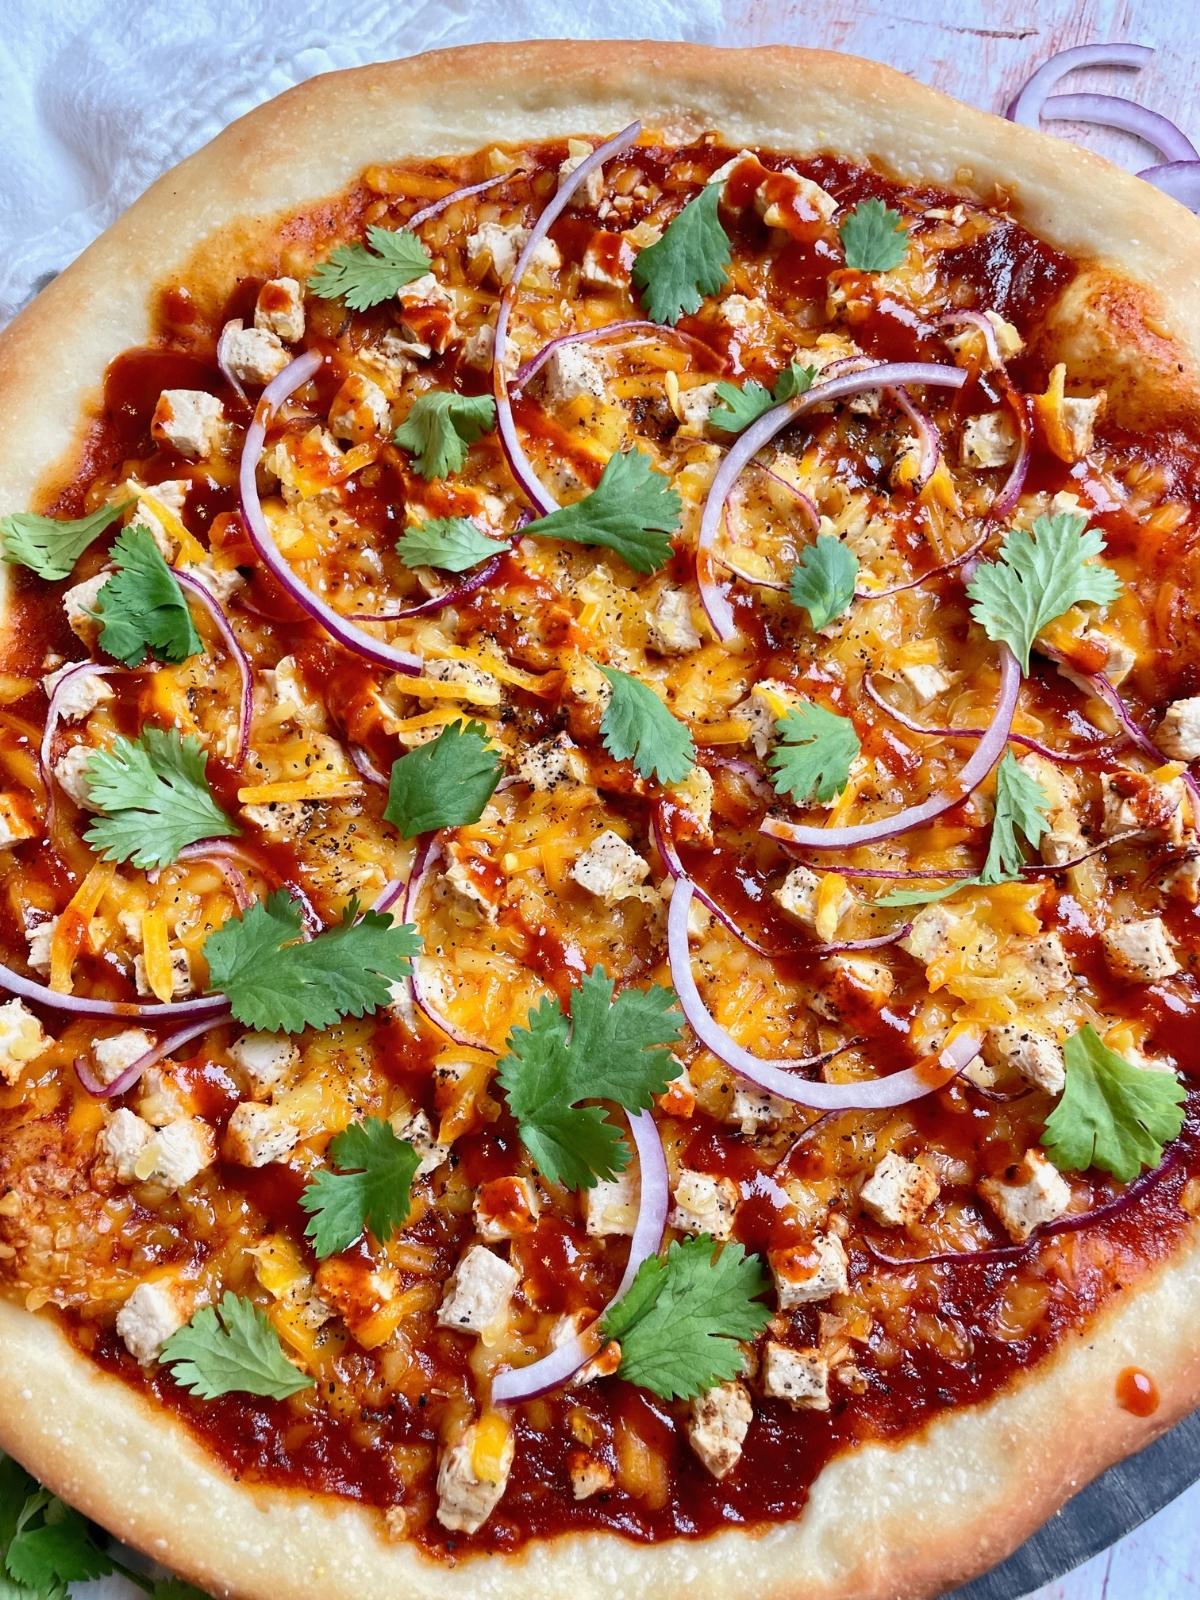 Barbecue pizza with toppings.